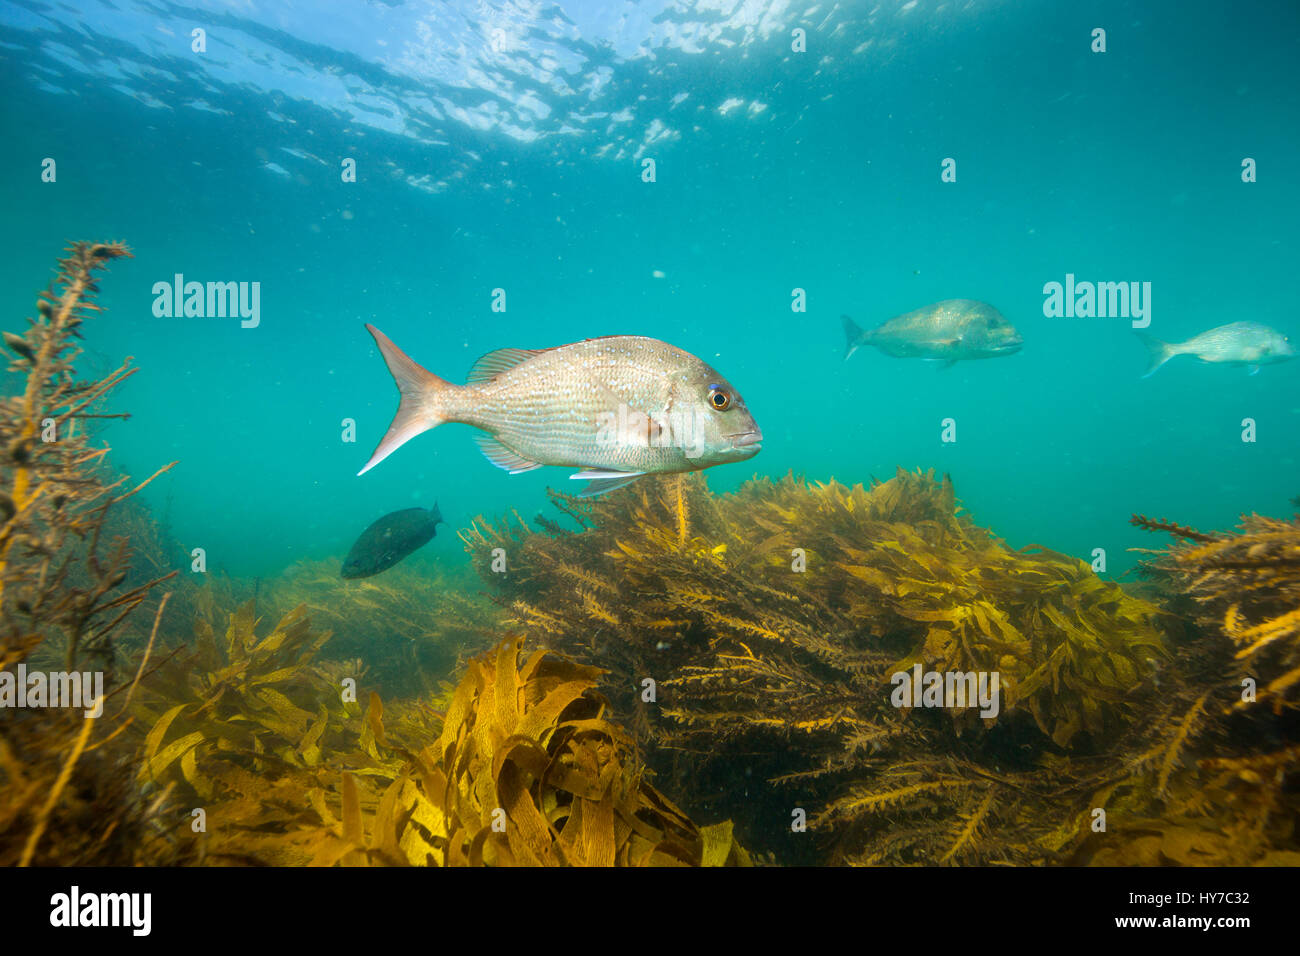 Snapper fish underwater swimming over kelp forest at Goat Island, New Zealand Stock Photo